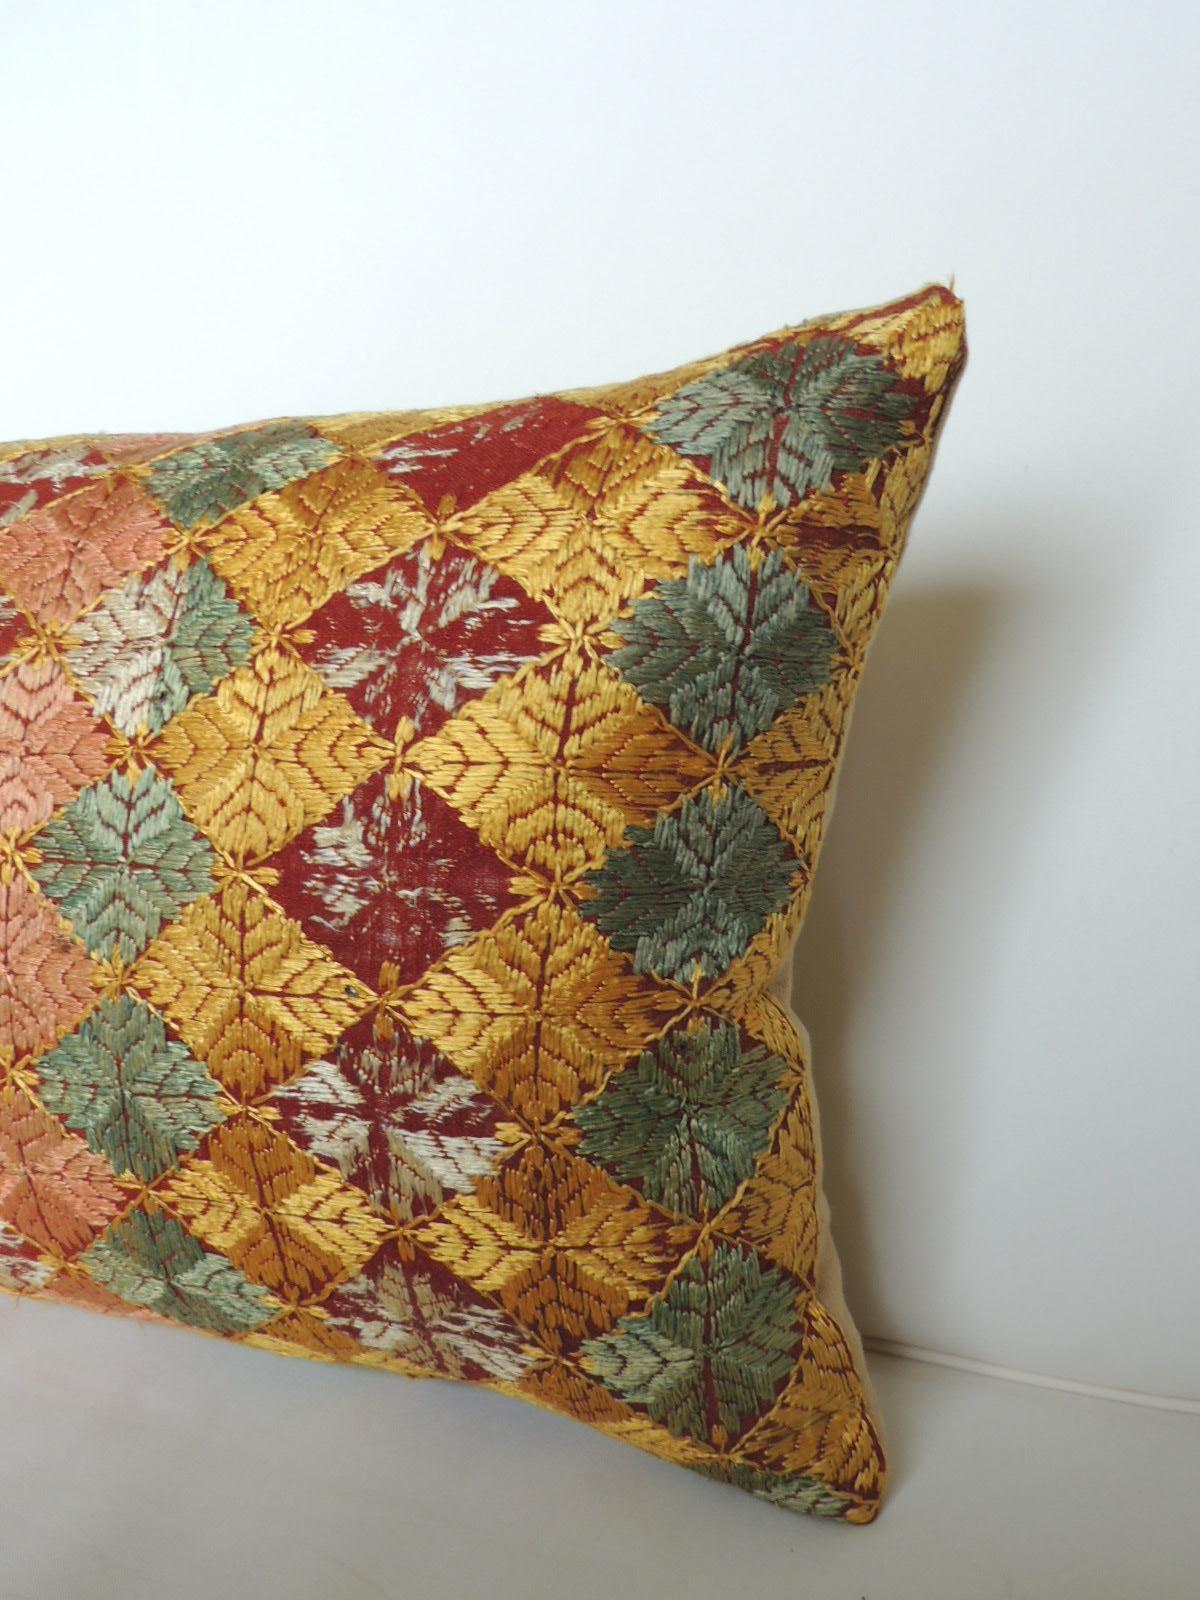 Throw pillow handcrafted with an artisanal Indian Phulkari textile exhibiting a yellow, green and white diamond pattern.
The Phulkari artisanal antique textile was handmade with embroidered silk floss threads stitched onto linen.
Sofy yellow linen